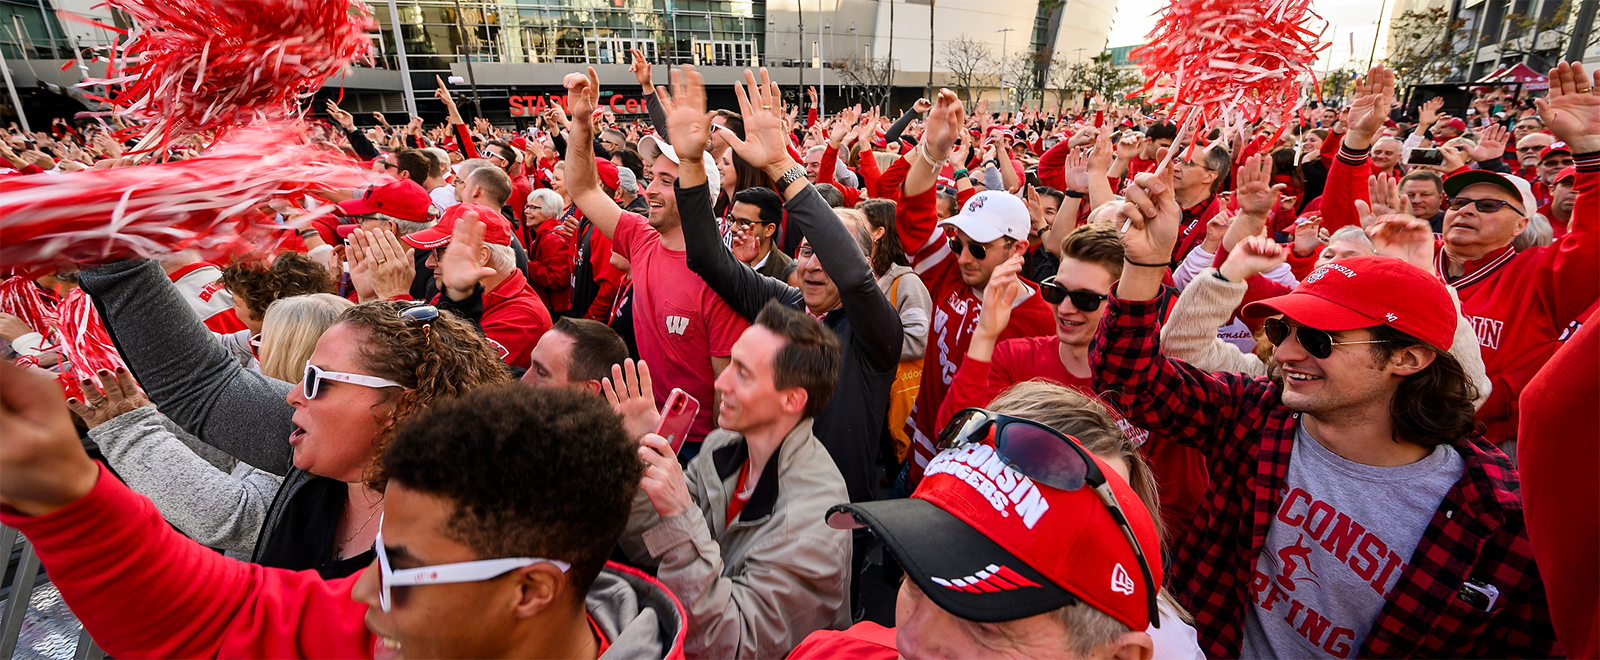 Hundreds of UW Badger fans take part in Jump Around during the UW-Madison Rose Bowl Pep Rally